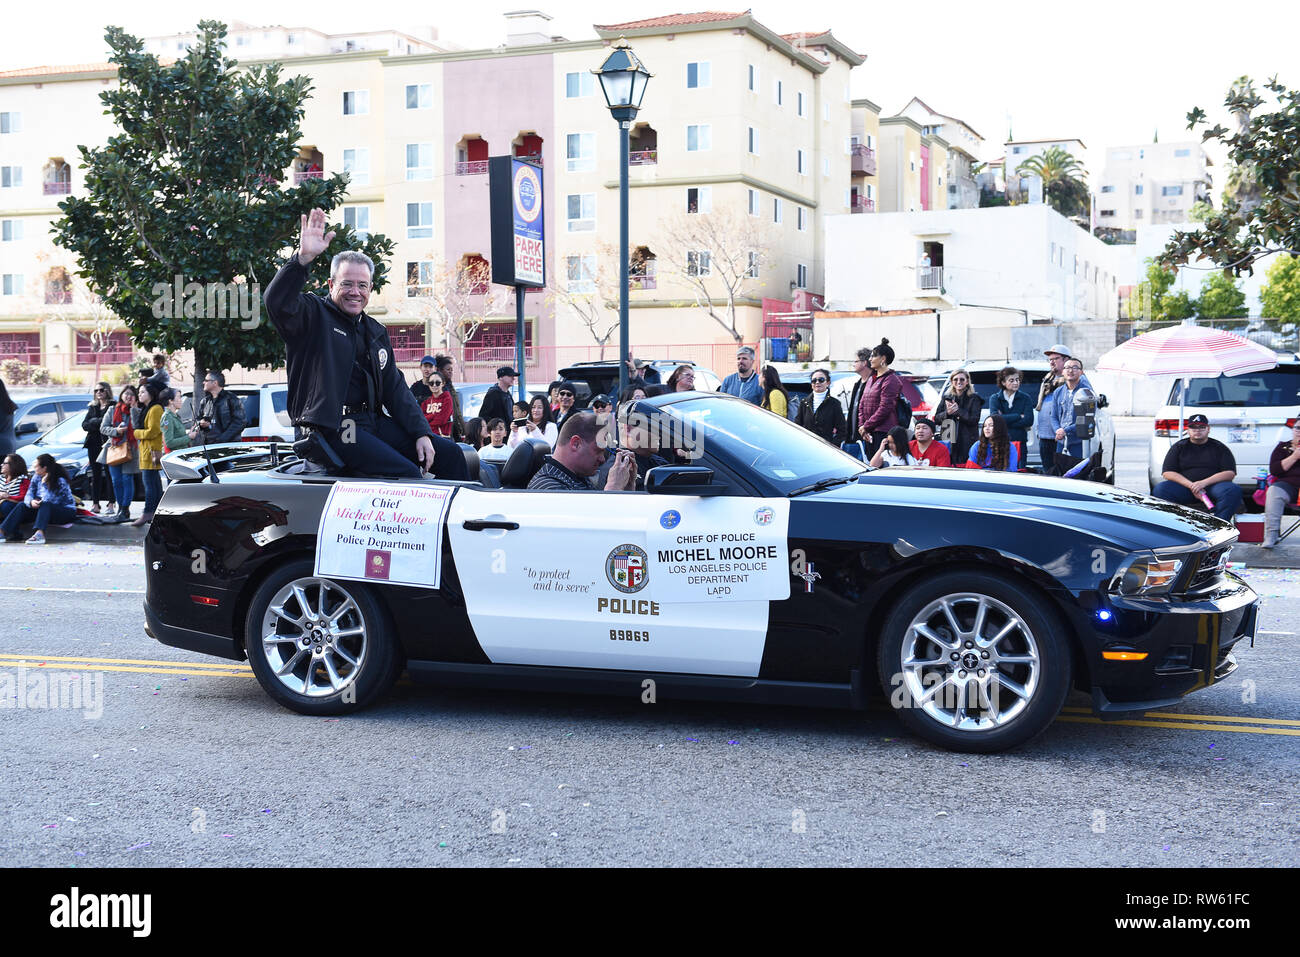 LOS ANGELES - Februar 9, 2019: LAPD Polizeichef Michel Moore Ausritte in die Chinese New Year Parade. Stockfoto